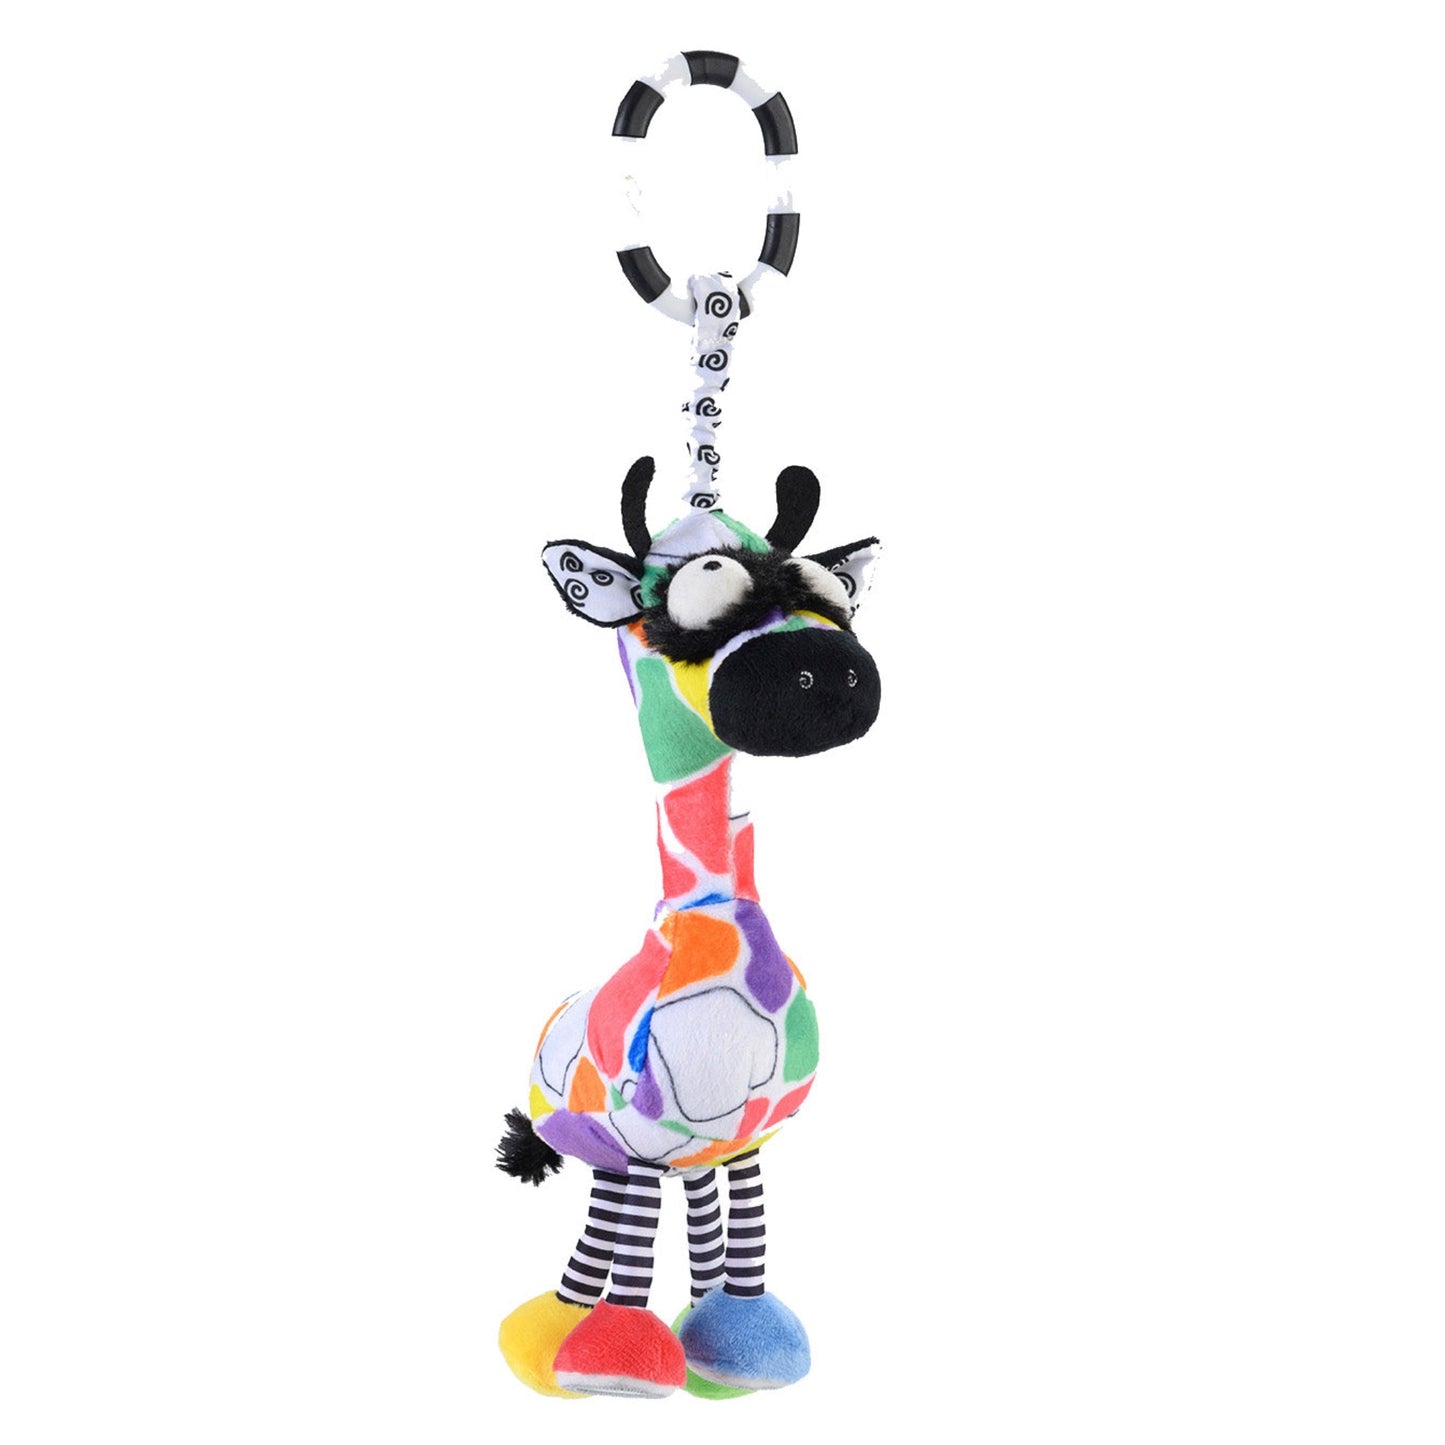 Jaffy the Fringe Footed Giraffe Chime & See Hanging Activity Toy